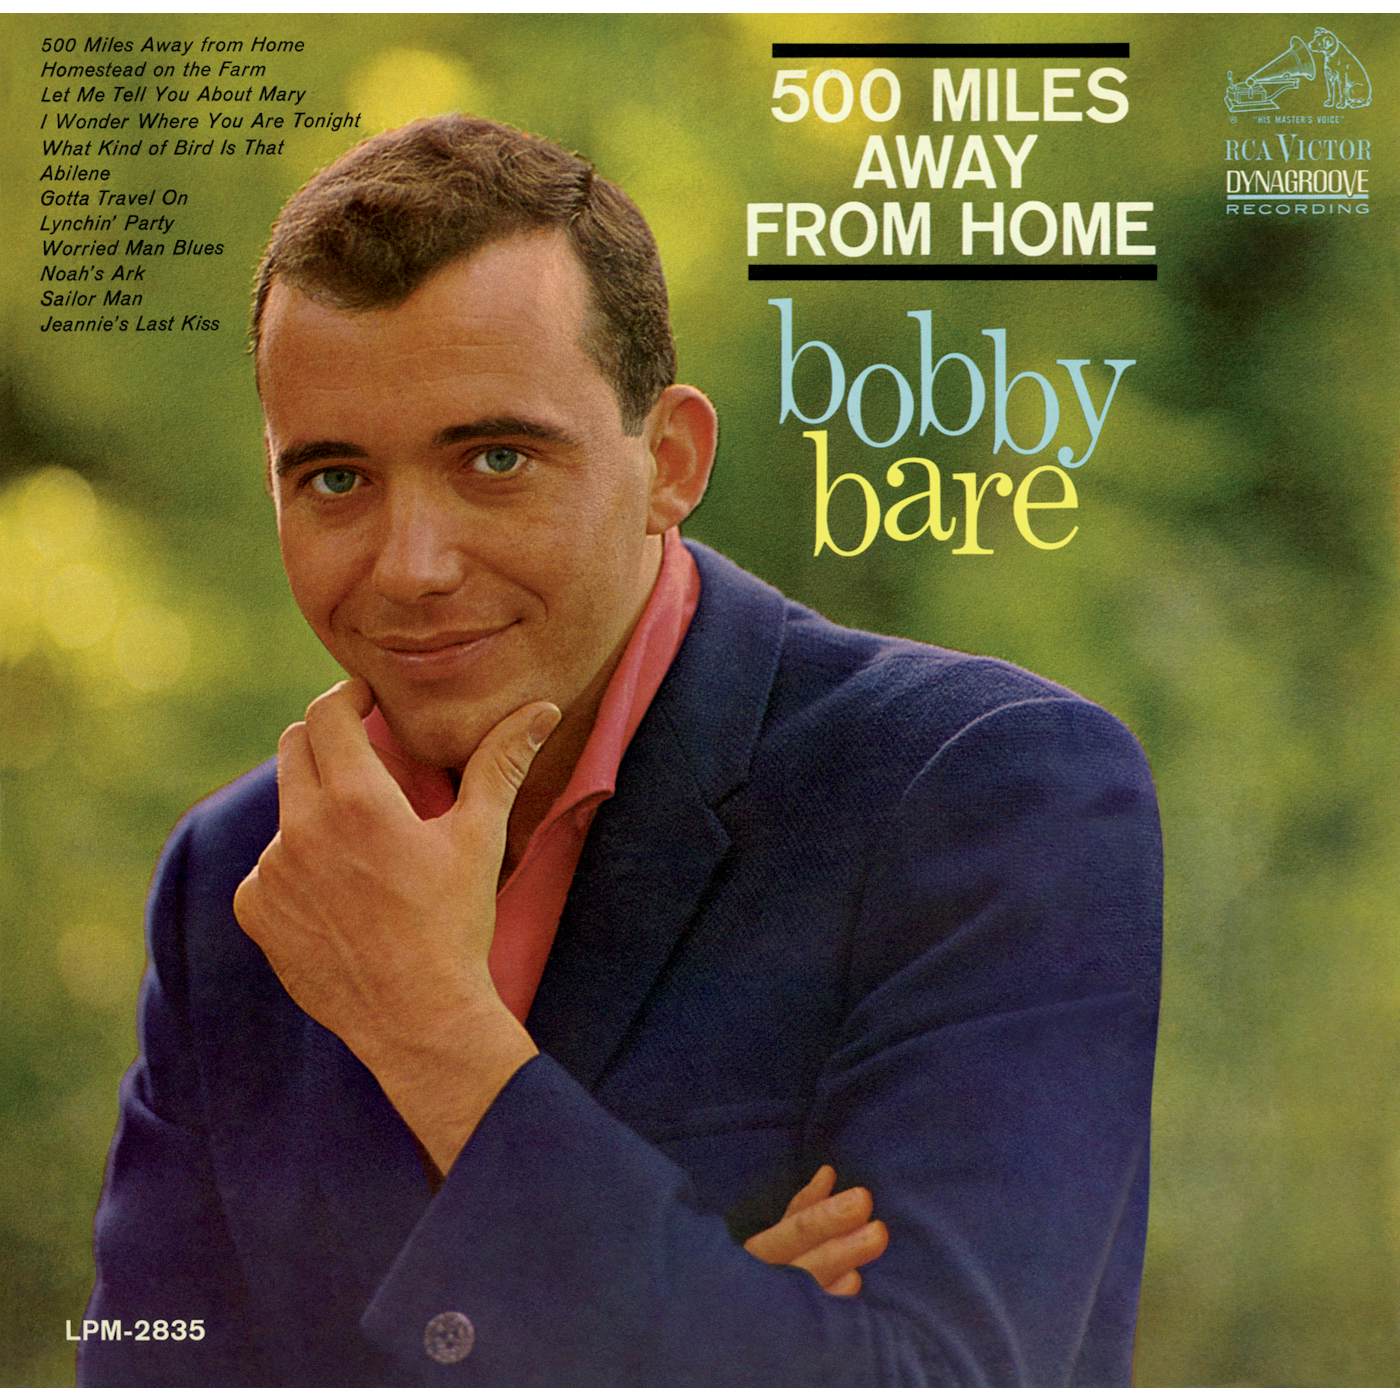 Bobby Bare 500 MILES AWAY FROM HOME CD